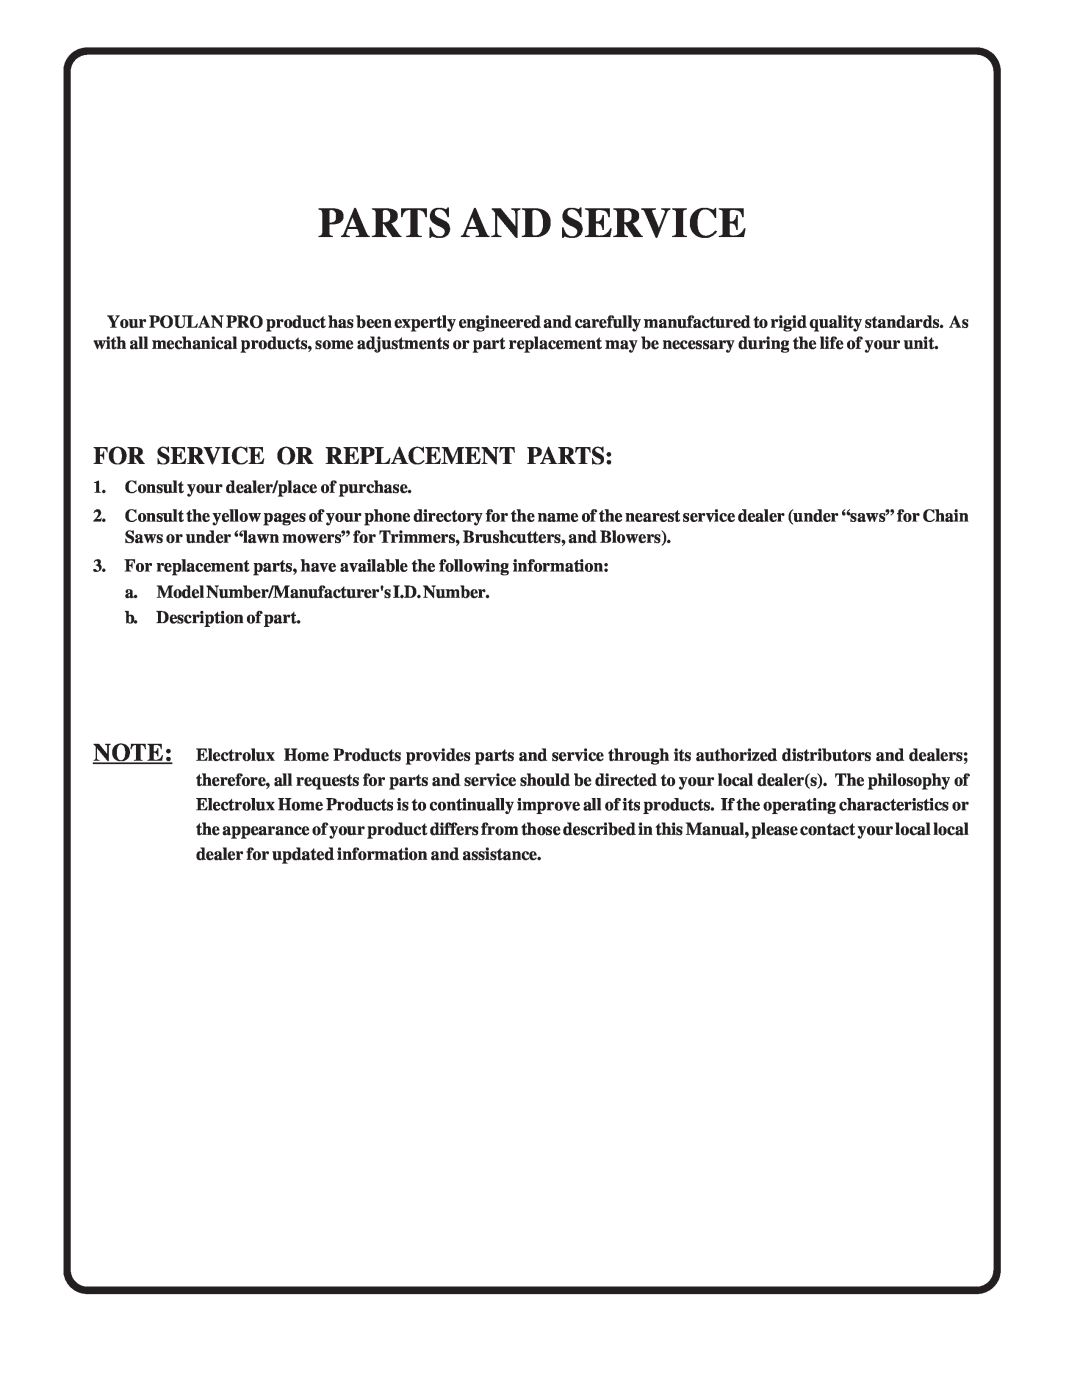 Poulan 183255 owner manual Parts And Service, For Service Or Replacement Parts 